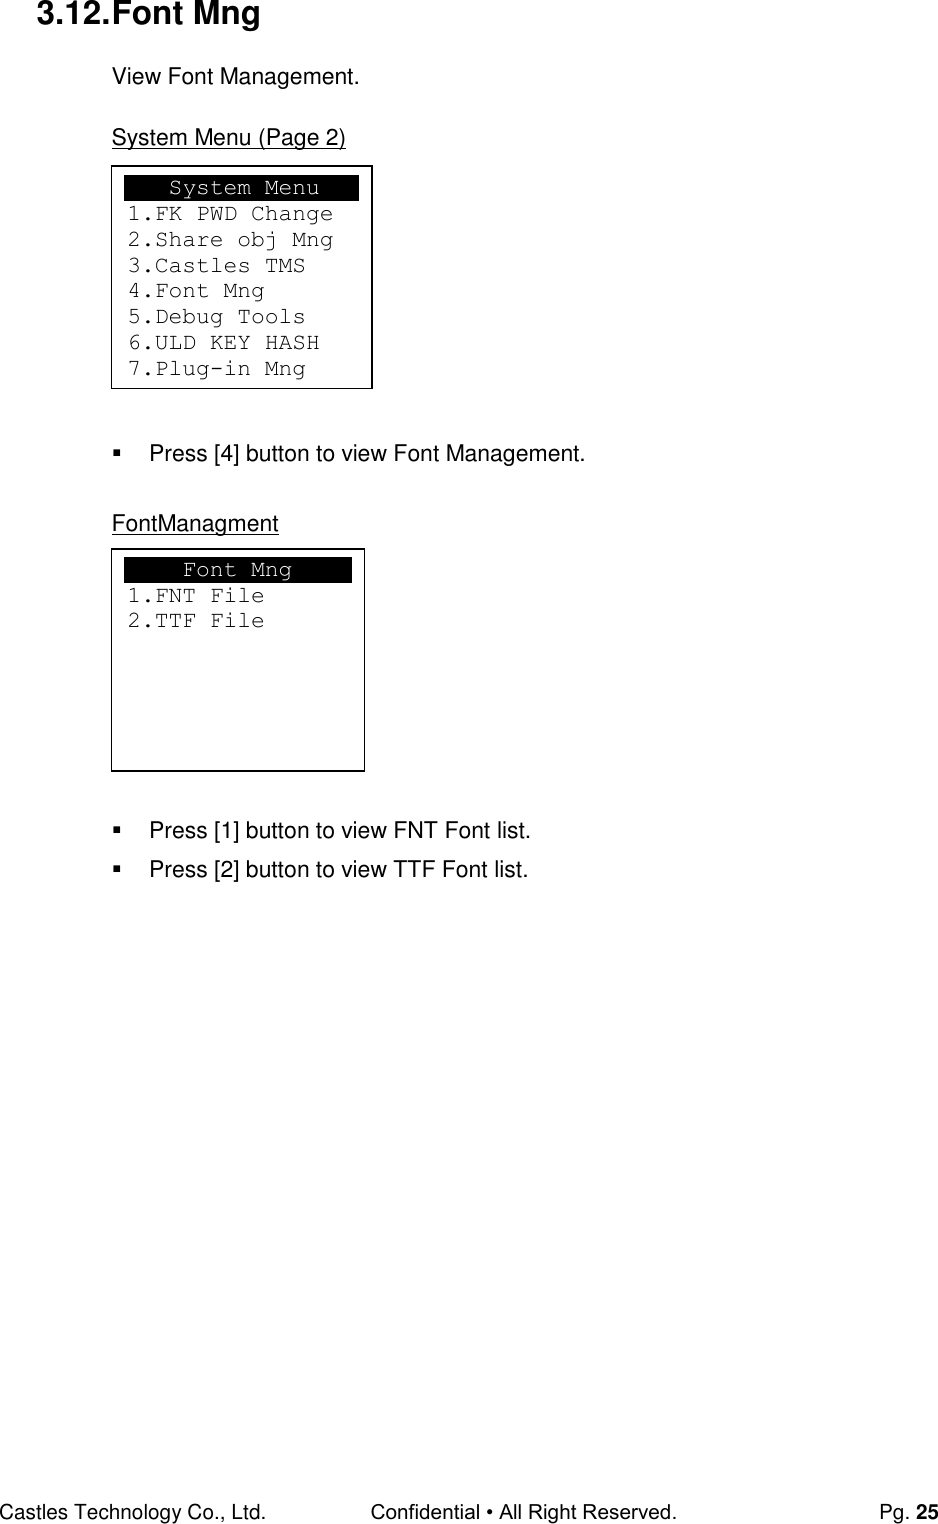 Castles Technology Co., Ltd. Confidential • All Right Reserved.  Pg. 25 3.12. Font Mng View Font Management.  System Menu (Page 2)          Press [4] button to view Font Management.  FontManagment          Press [1] button to view FNT Font list.   Press [2] button to view TTF Font list.                      Font Mng 1.FNT File 2.TTF File    System Menu 1.FK PWD Change 2.Share obj Mng 3.Castles TMS 4.Font Mng 5.Debug Tools 6.ULD KEY HASH 7.Plug-in Mng  